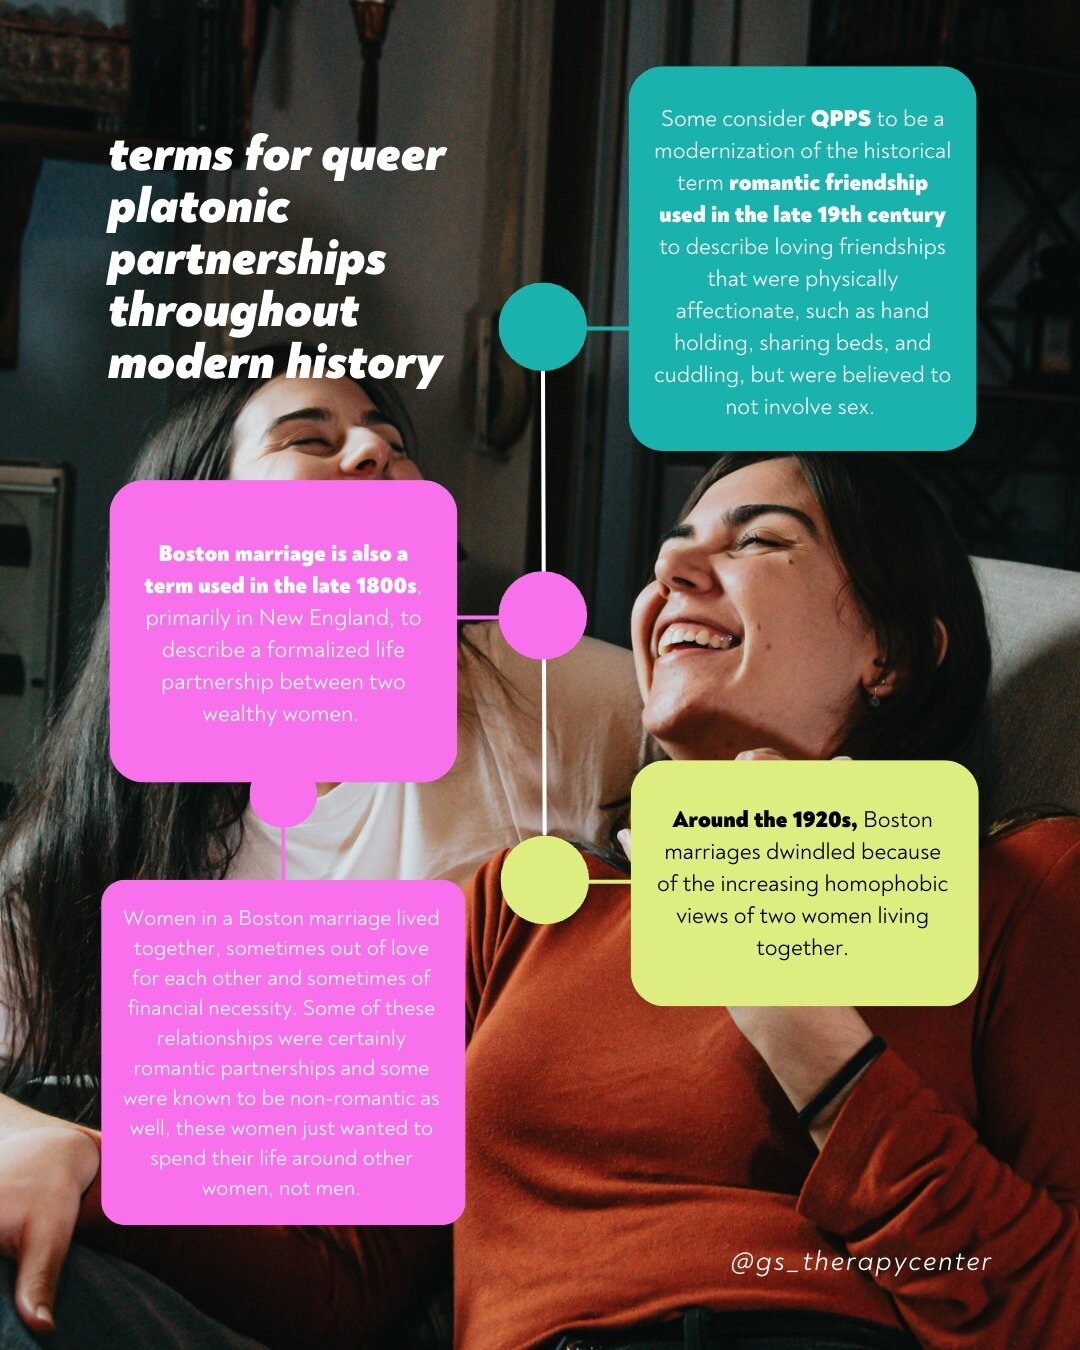 Also referred to as a queerplatonic relationship, a queerplatonic partnership is a newer term for a practice that has been present throughout history in various cultures. The term originated online in the 2010s among people in the asexual community, 